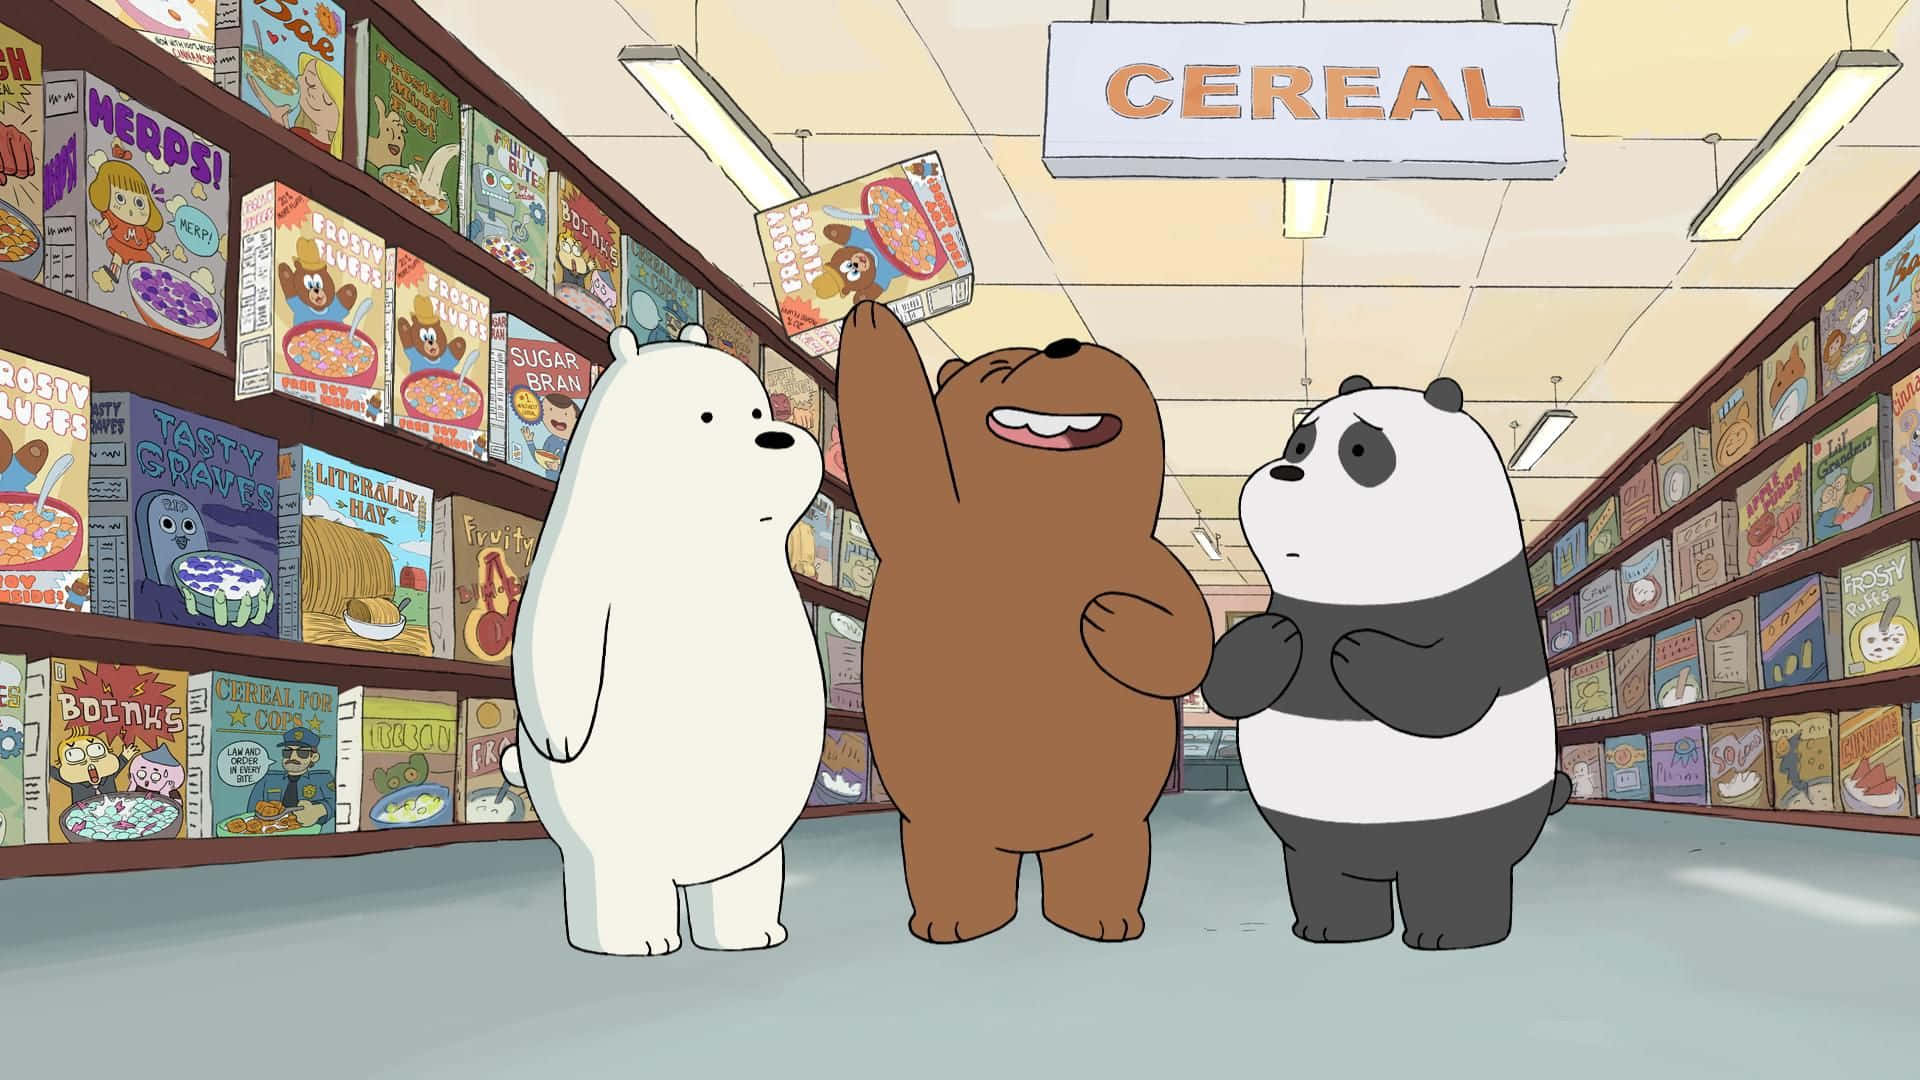 The We Bare Bears crew - Grizzly, Panda, and Ice Bear